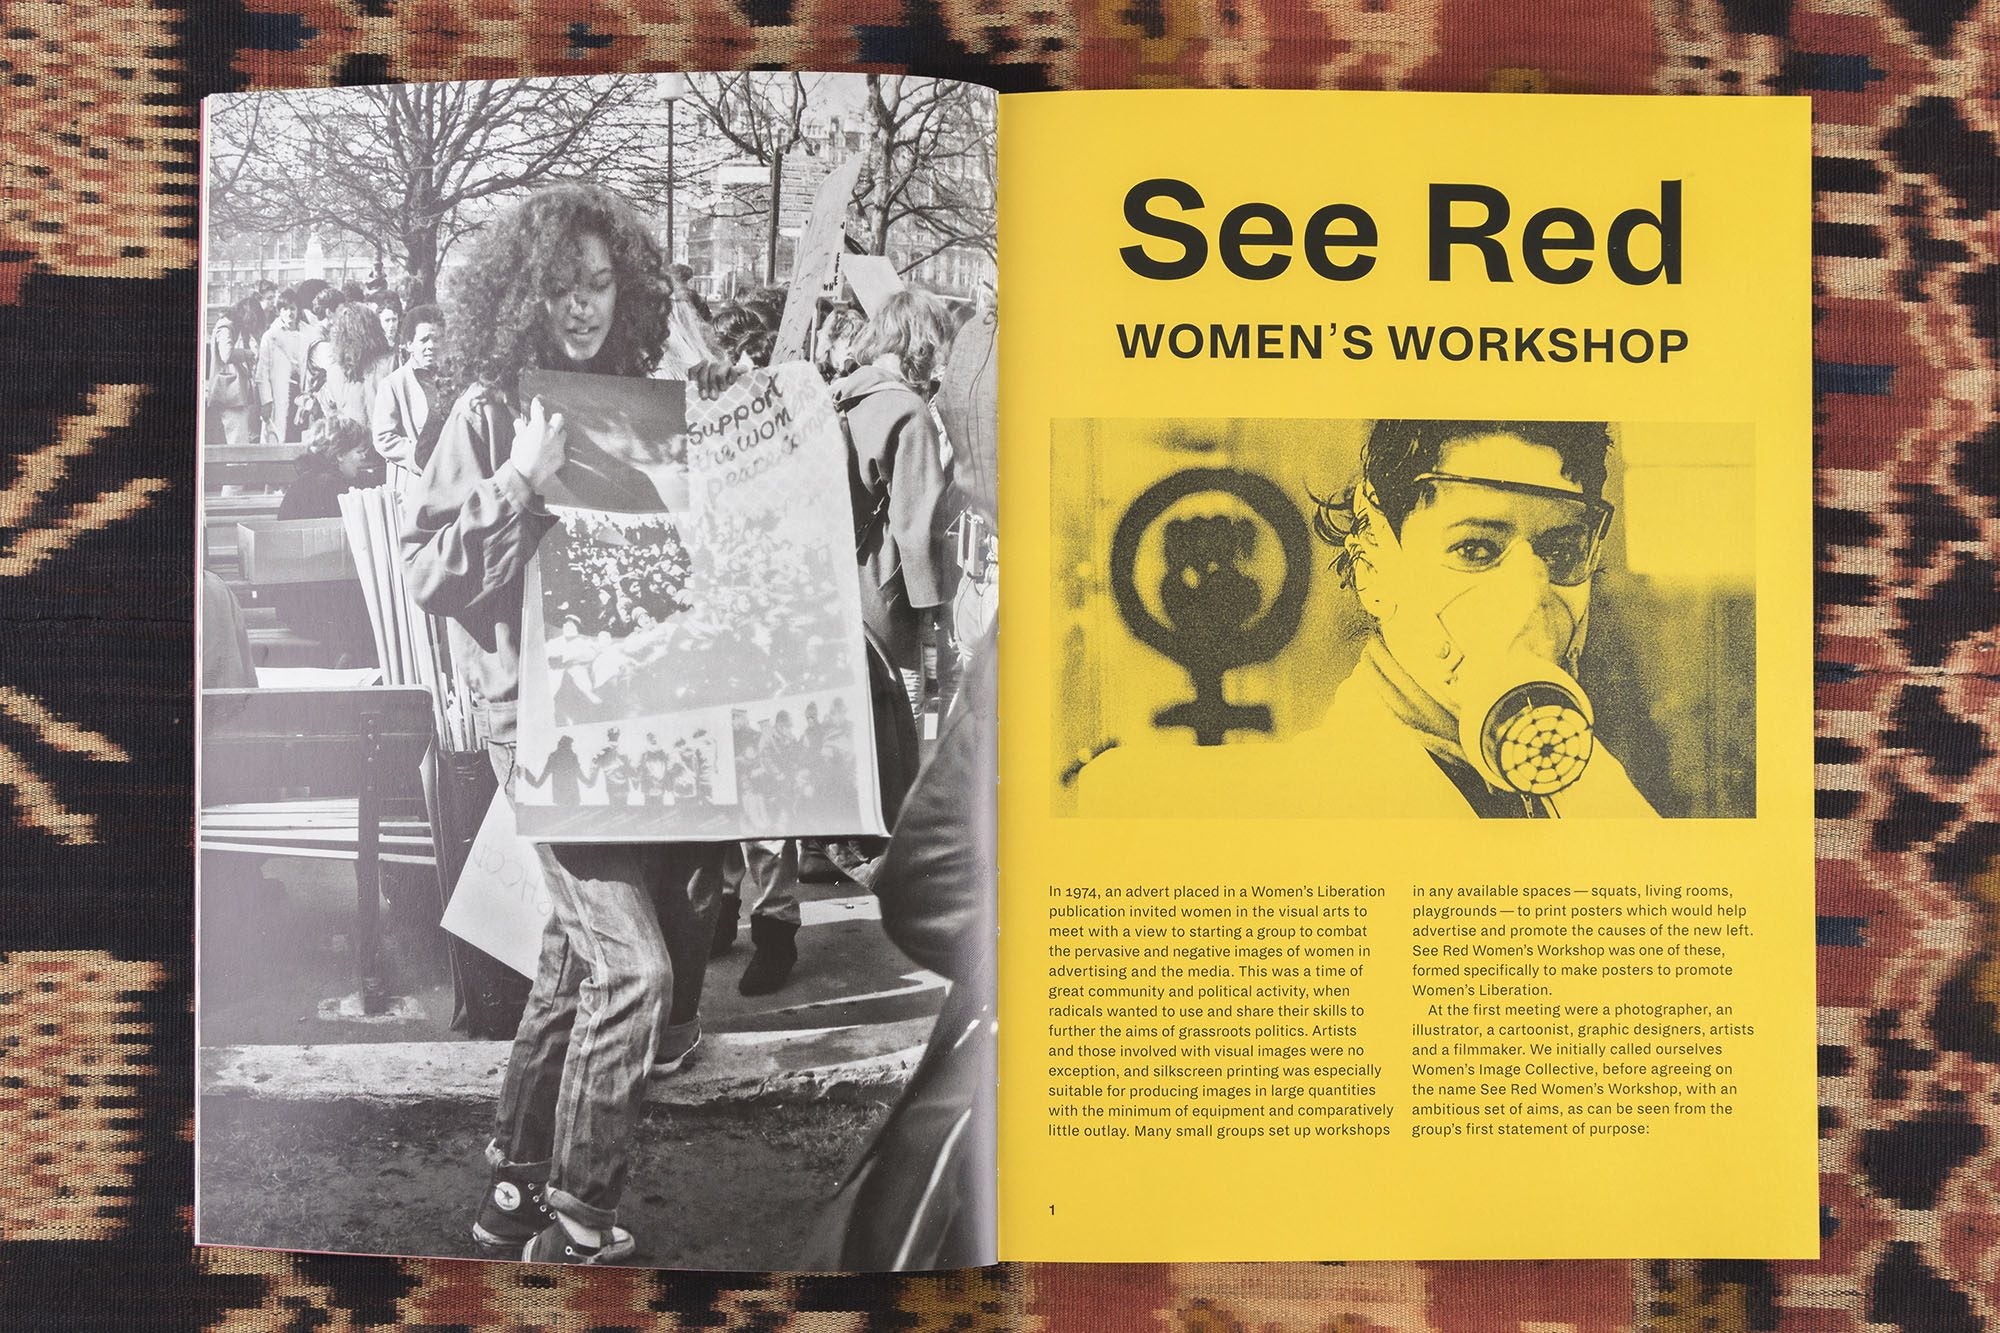 See Red - Women's Workshop - Feminist Posters 1974-1990